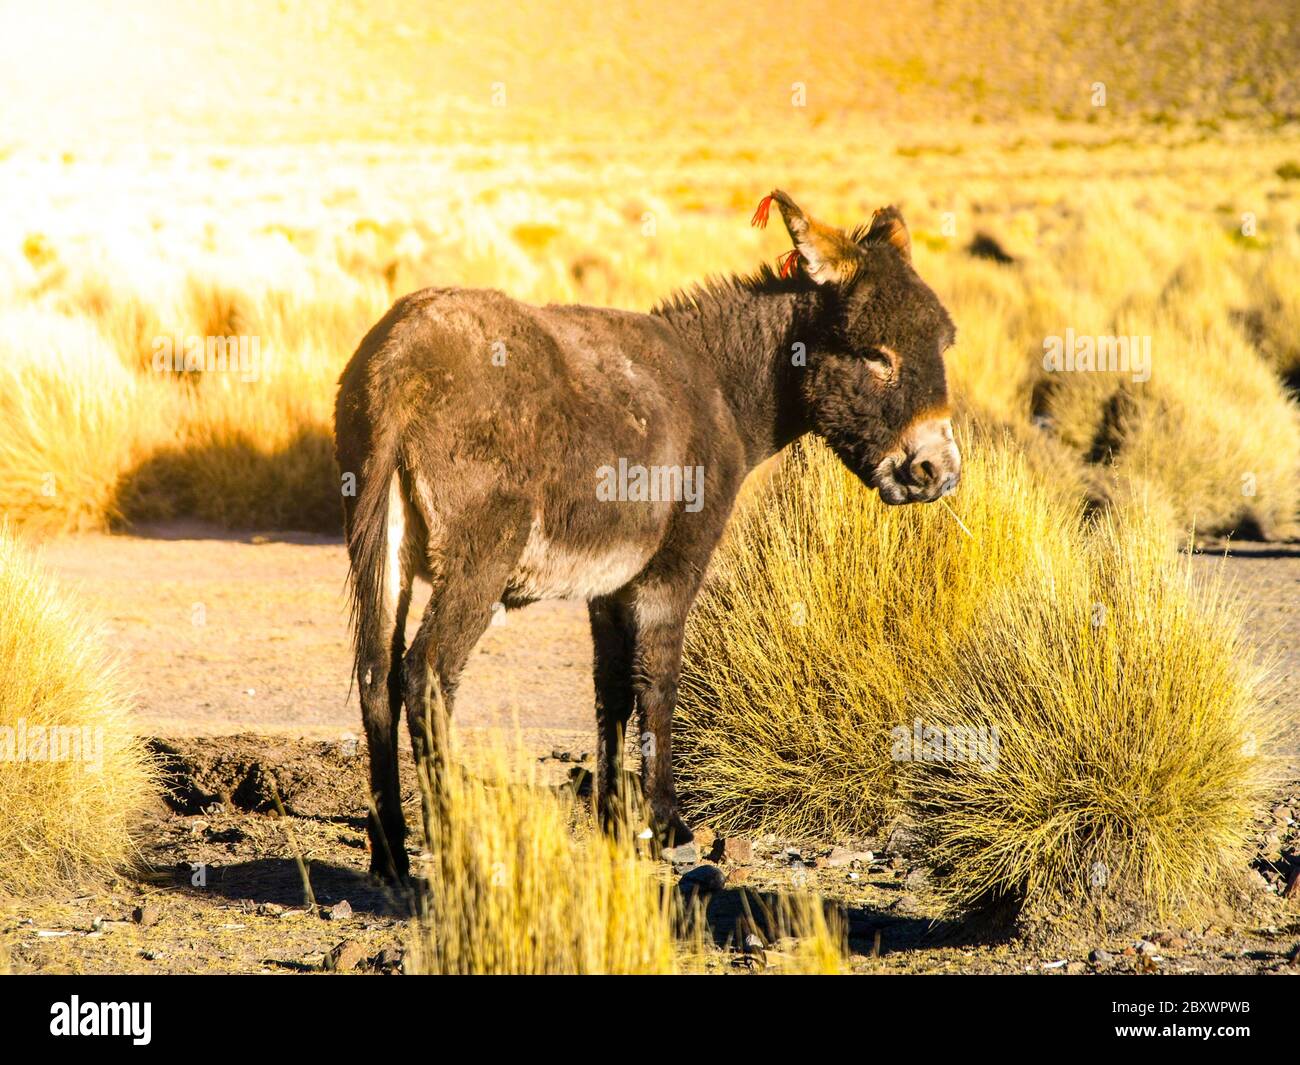 Black donkey with red tassels on ears on Andean Altiplano, Bolivia, South America Stock Photo